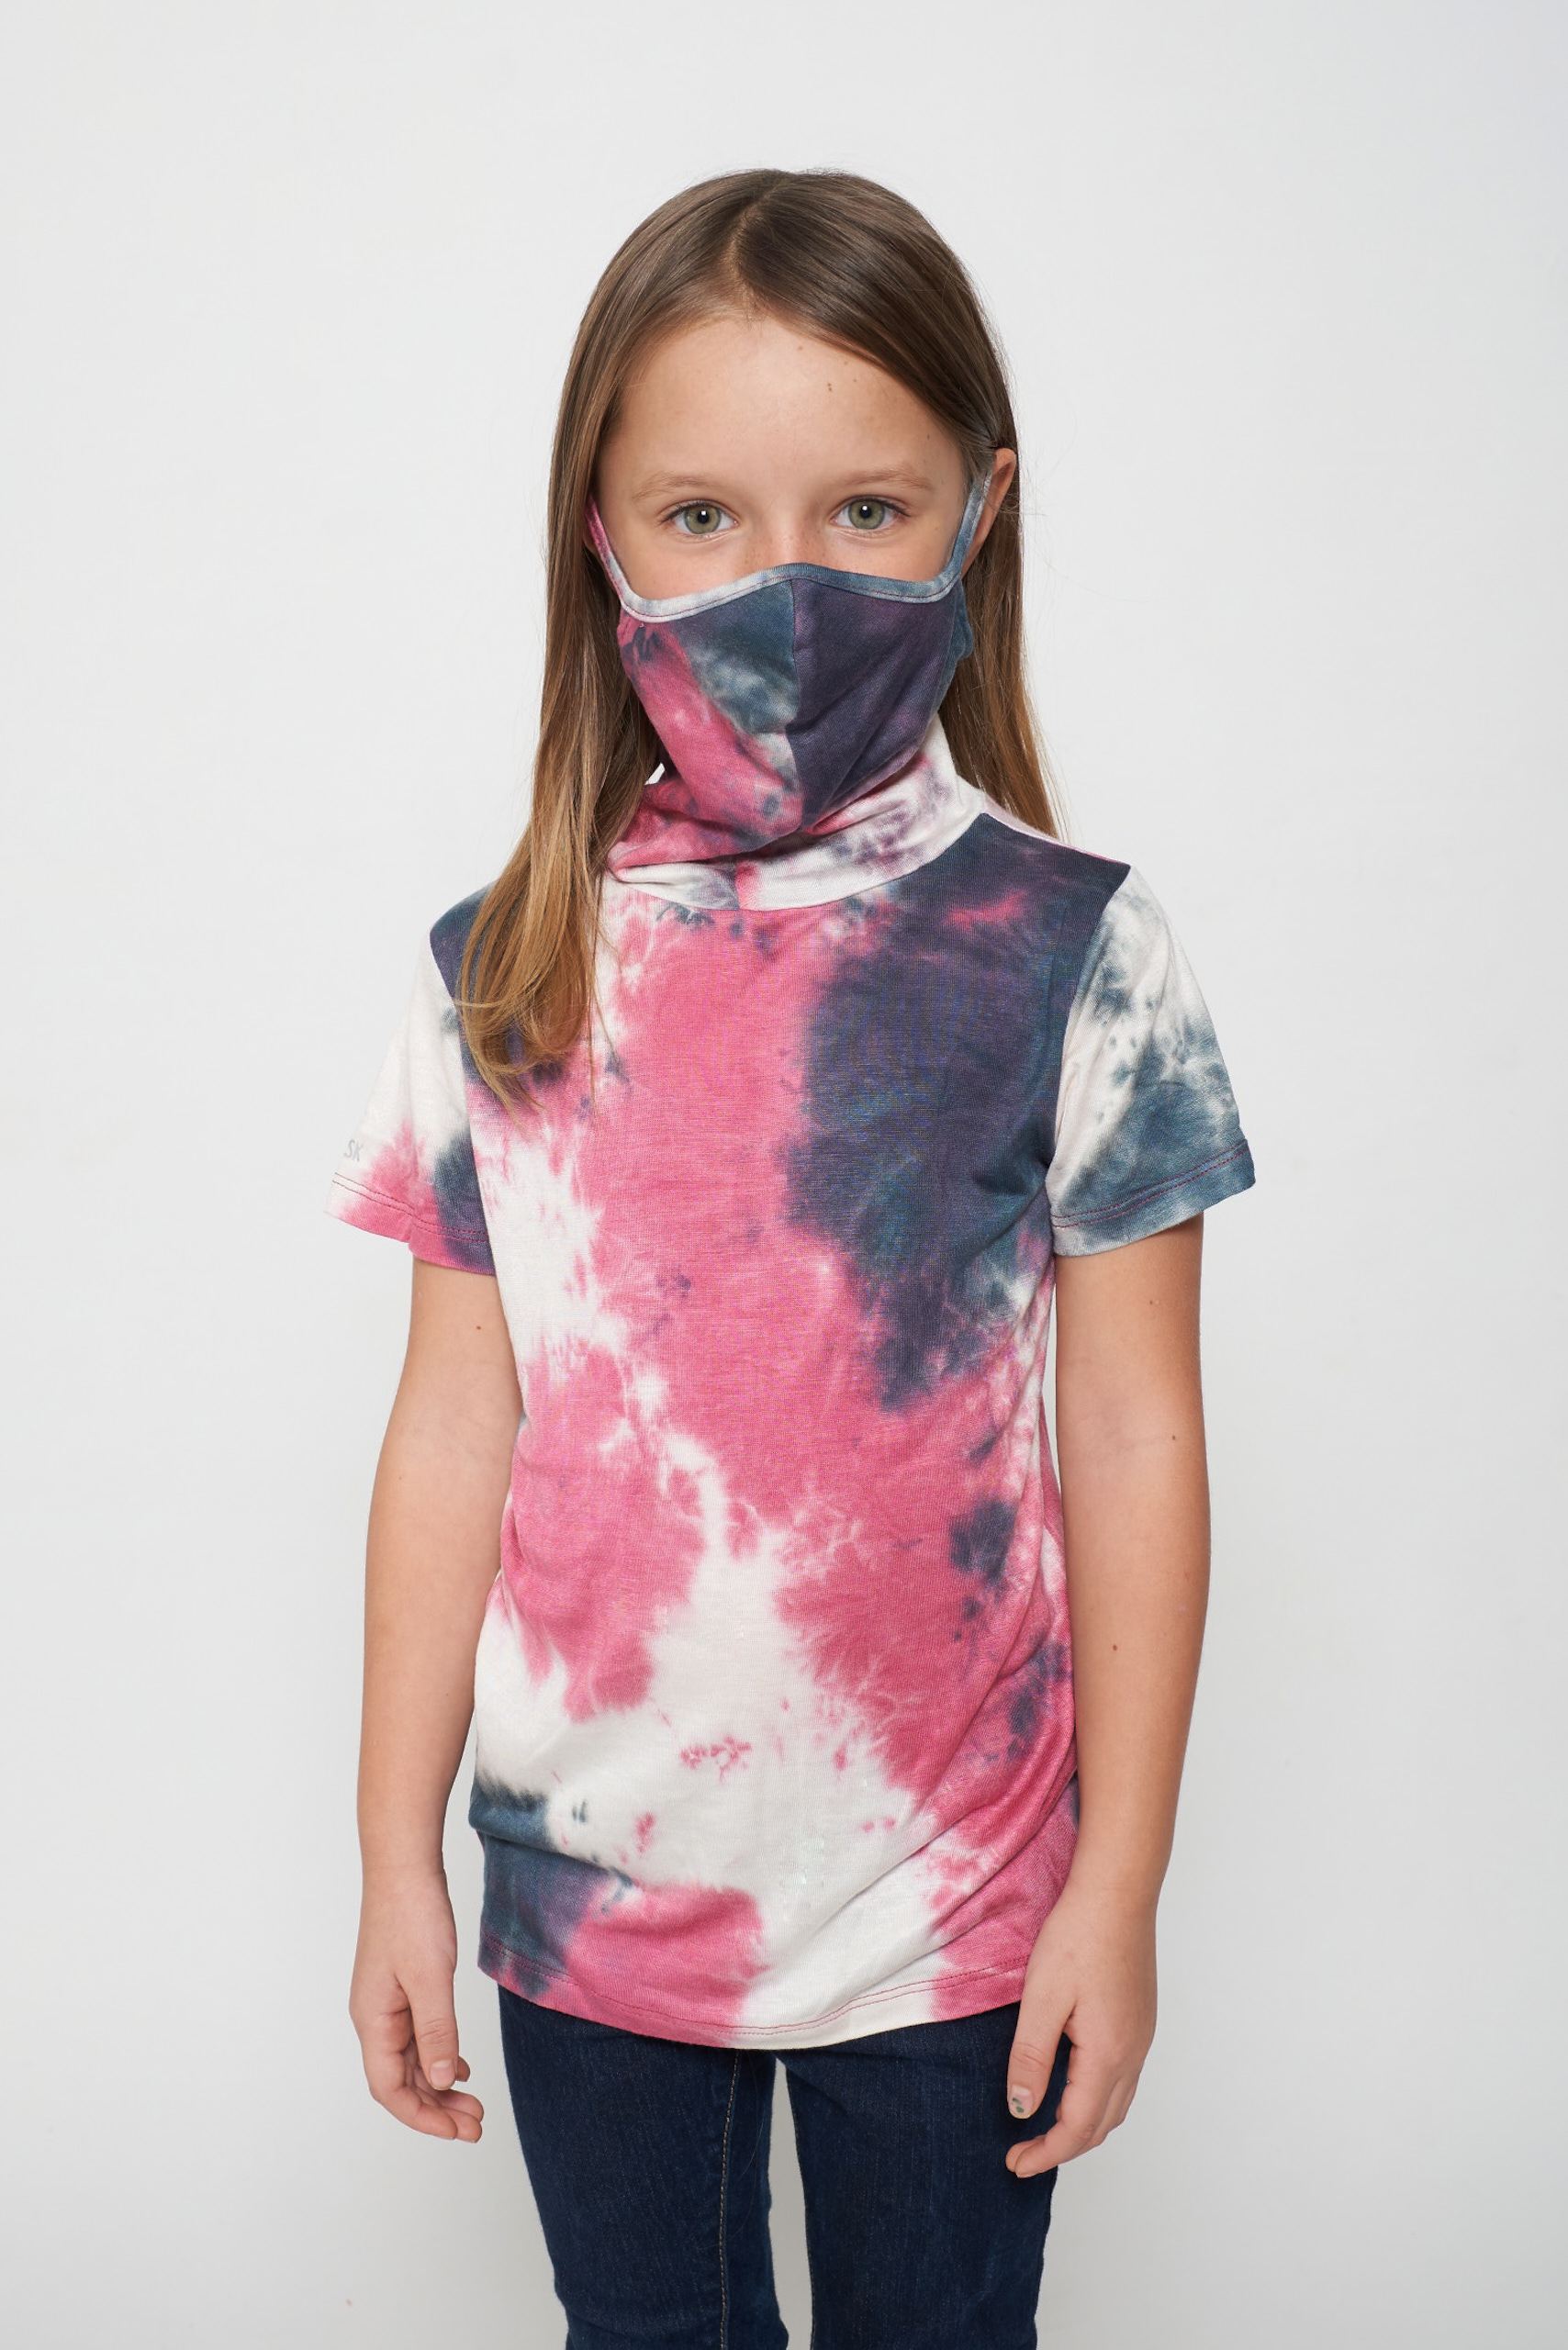 Kids Short Sleeve Pink White Blue Tie-dye #9 Shmask™ Earloop Face Mask for Kids and Adults